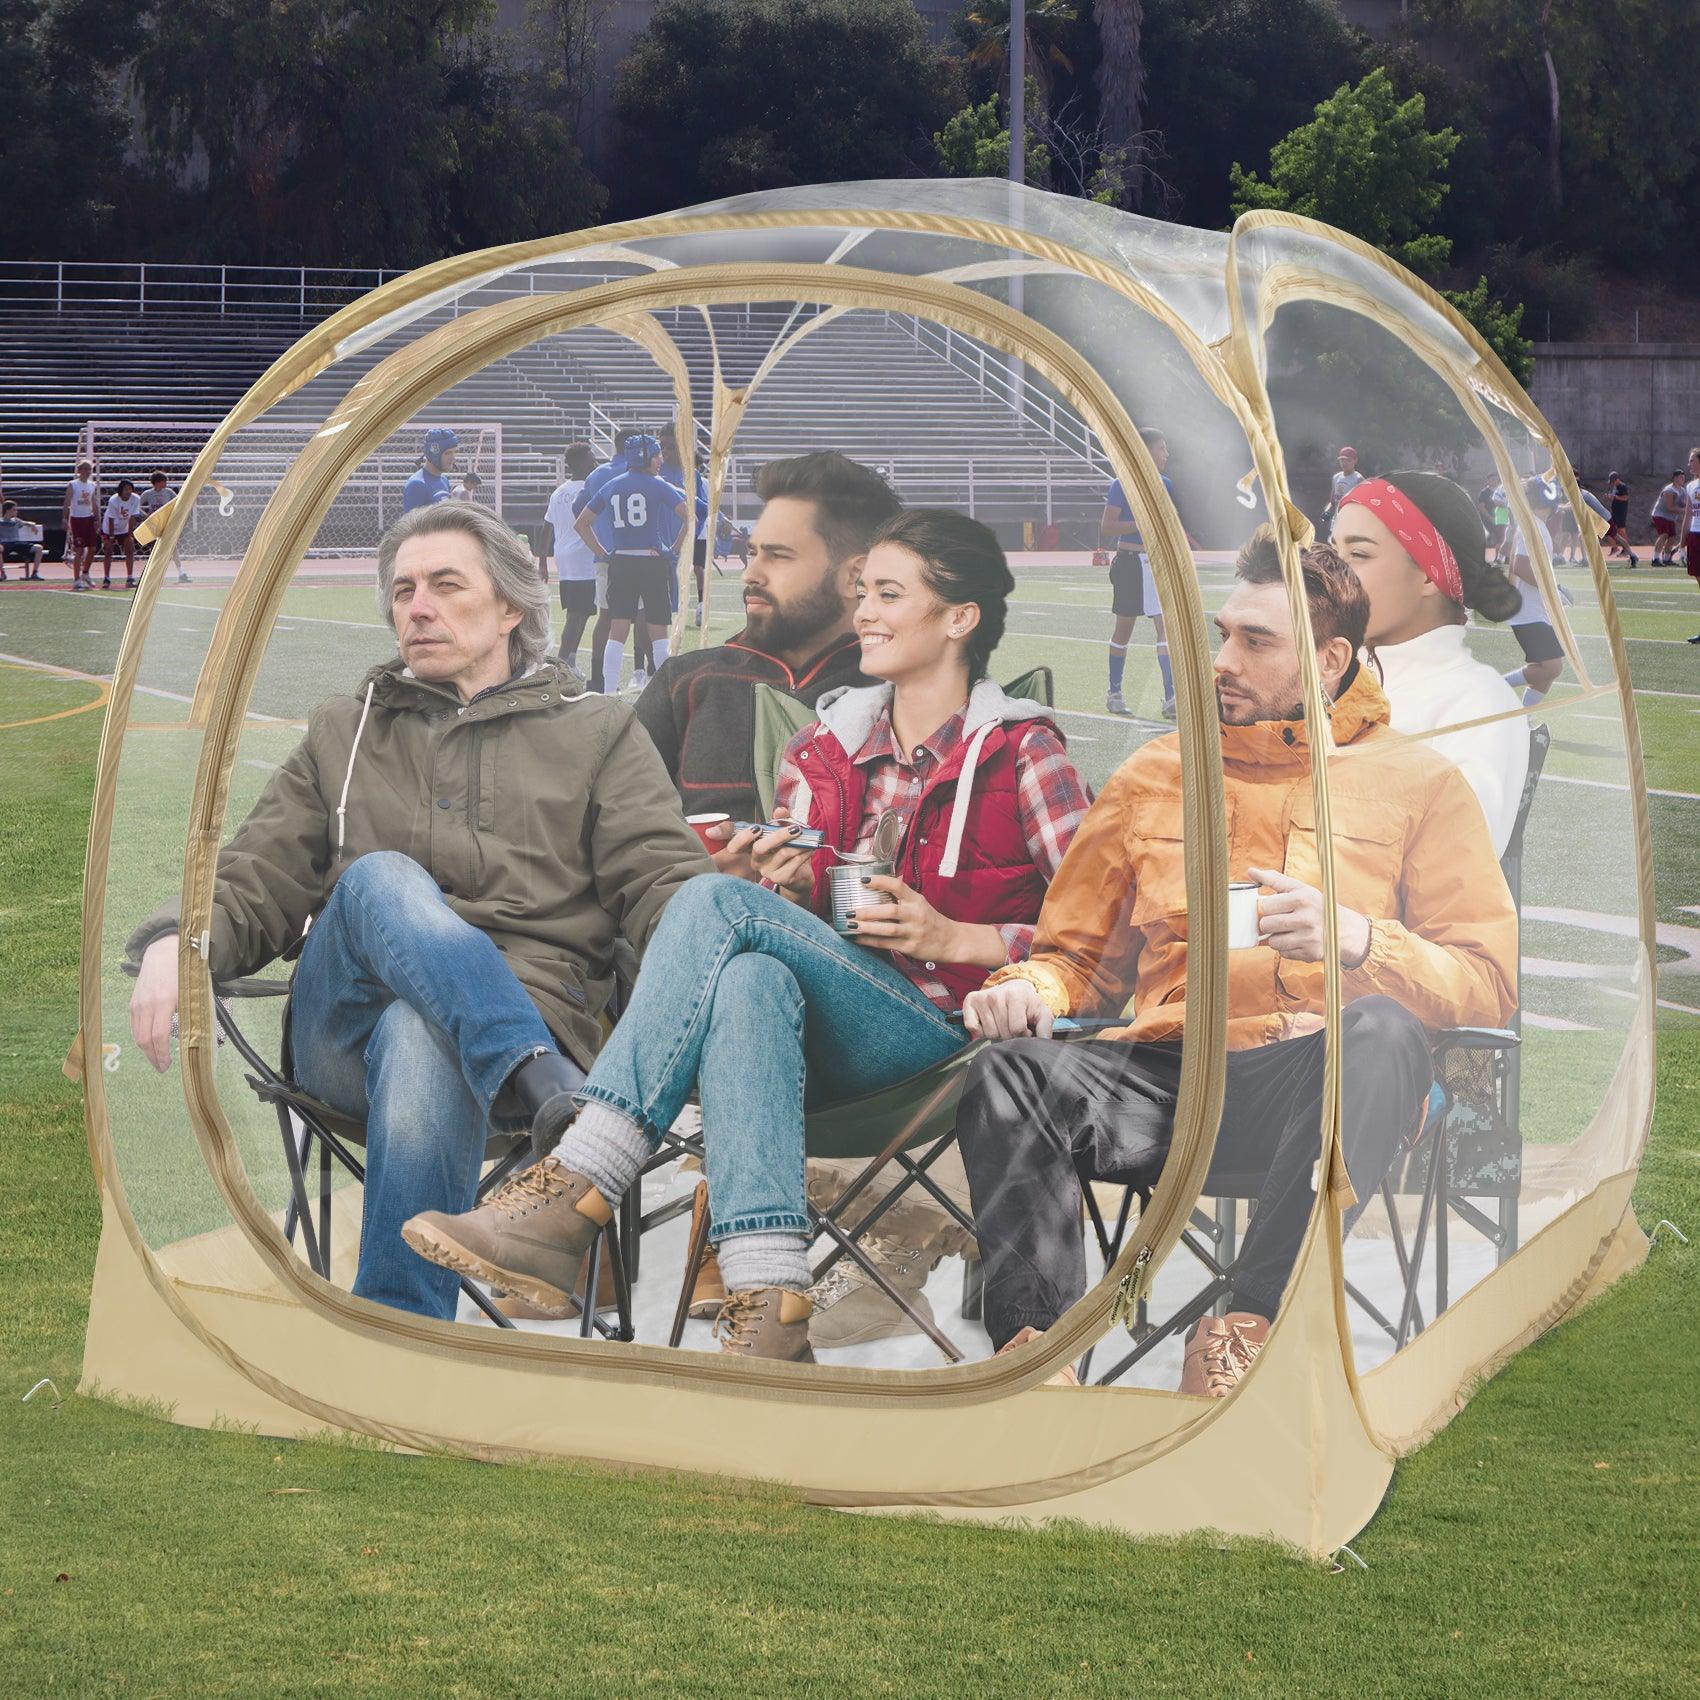 5 adults waiting on the sideline in a clear sports shelter